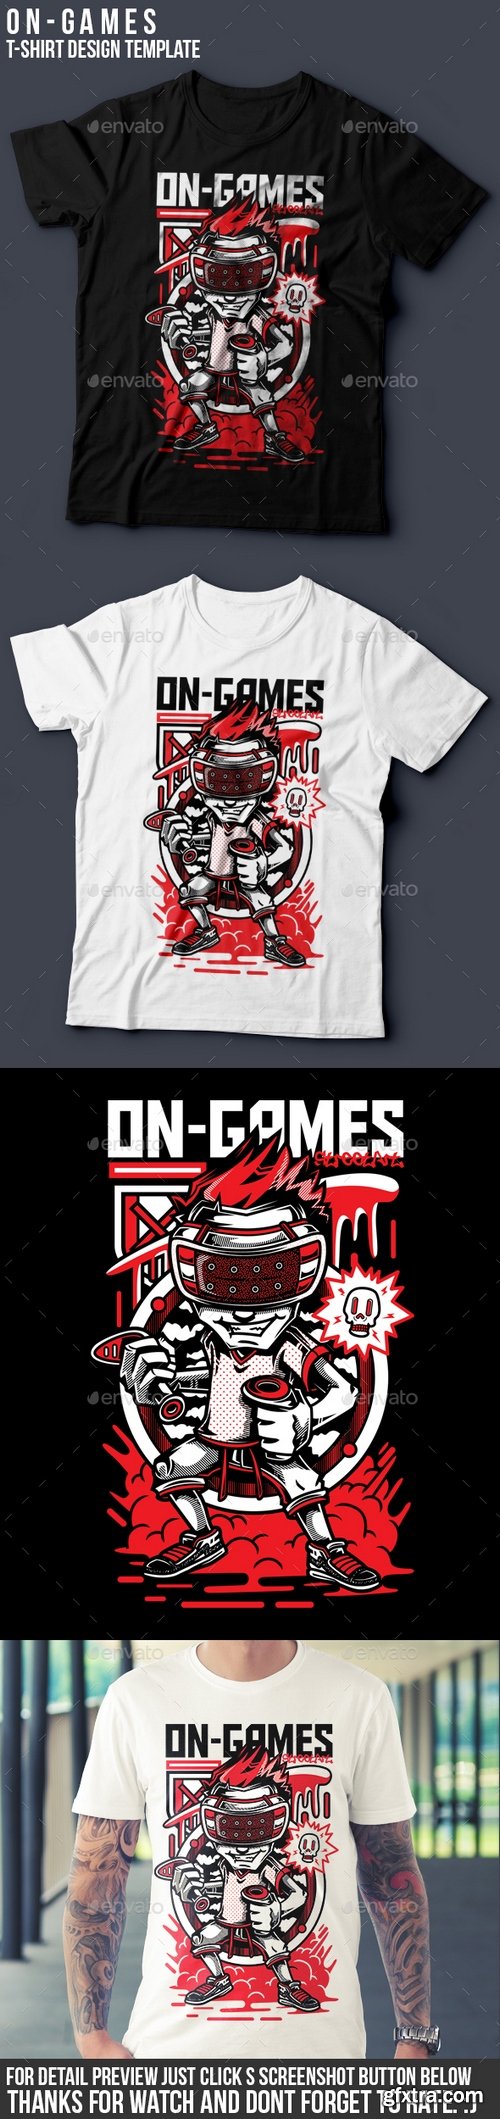 Graphicriver - On-Games T-Shirt Design 18075219